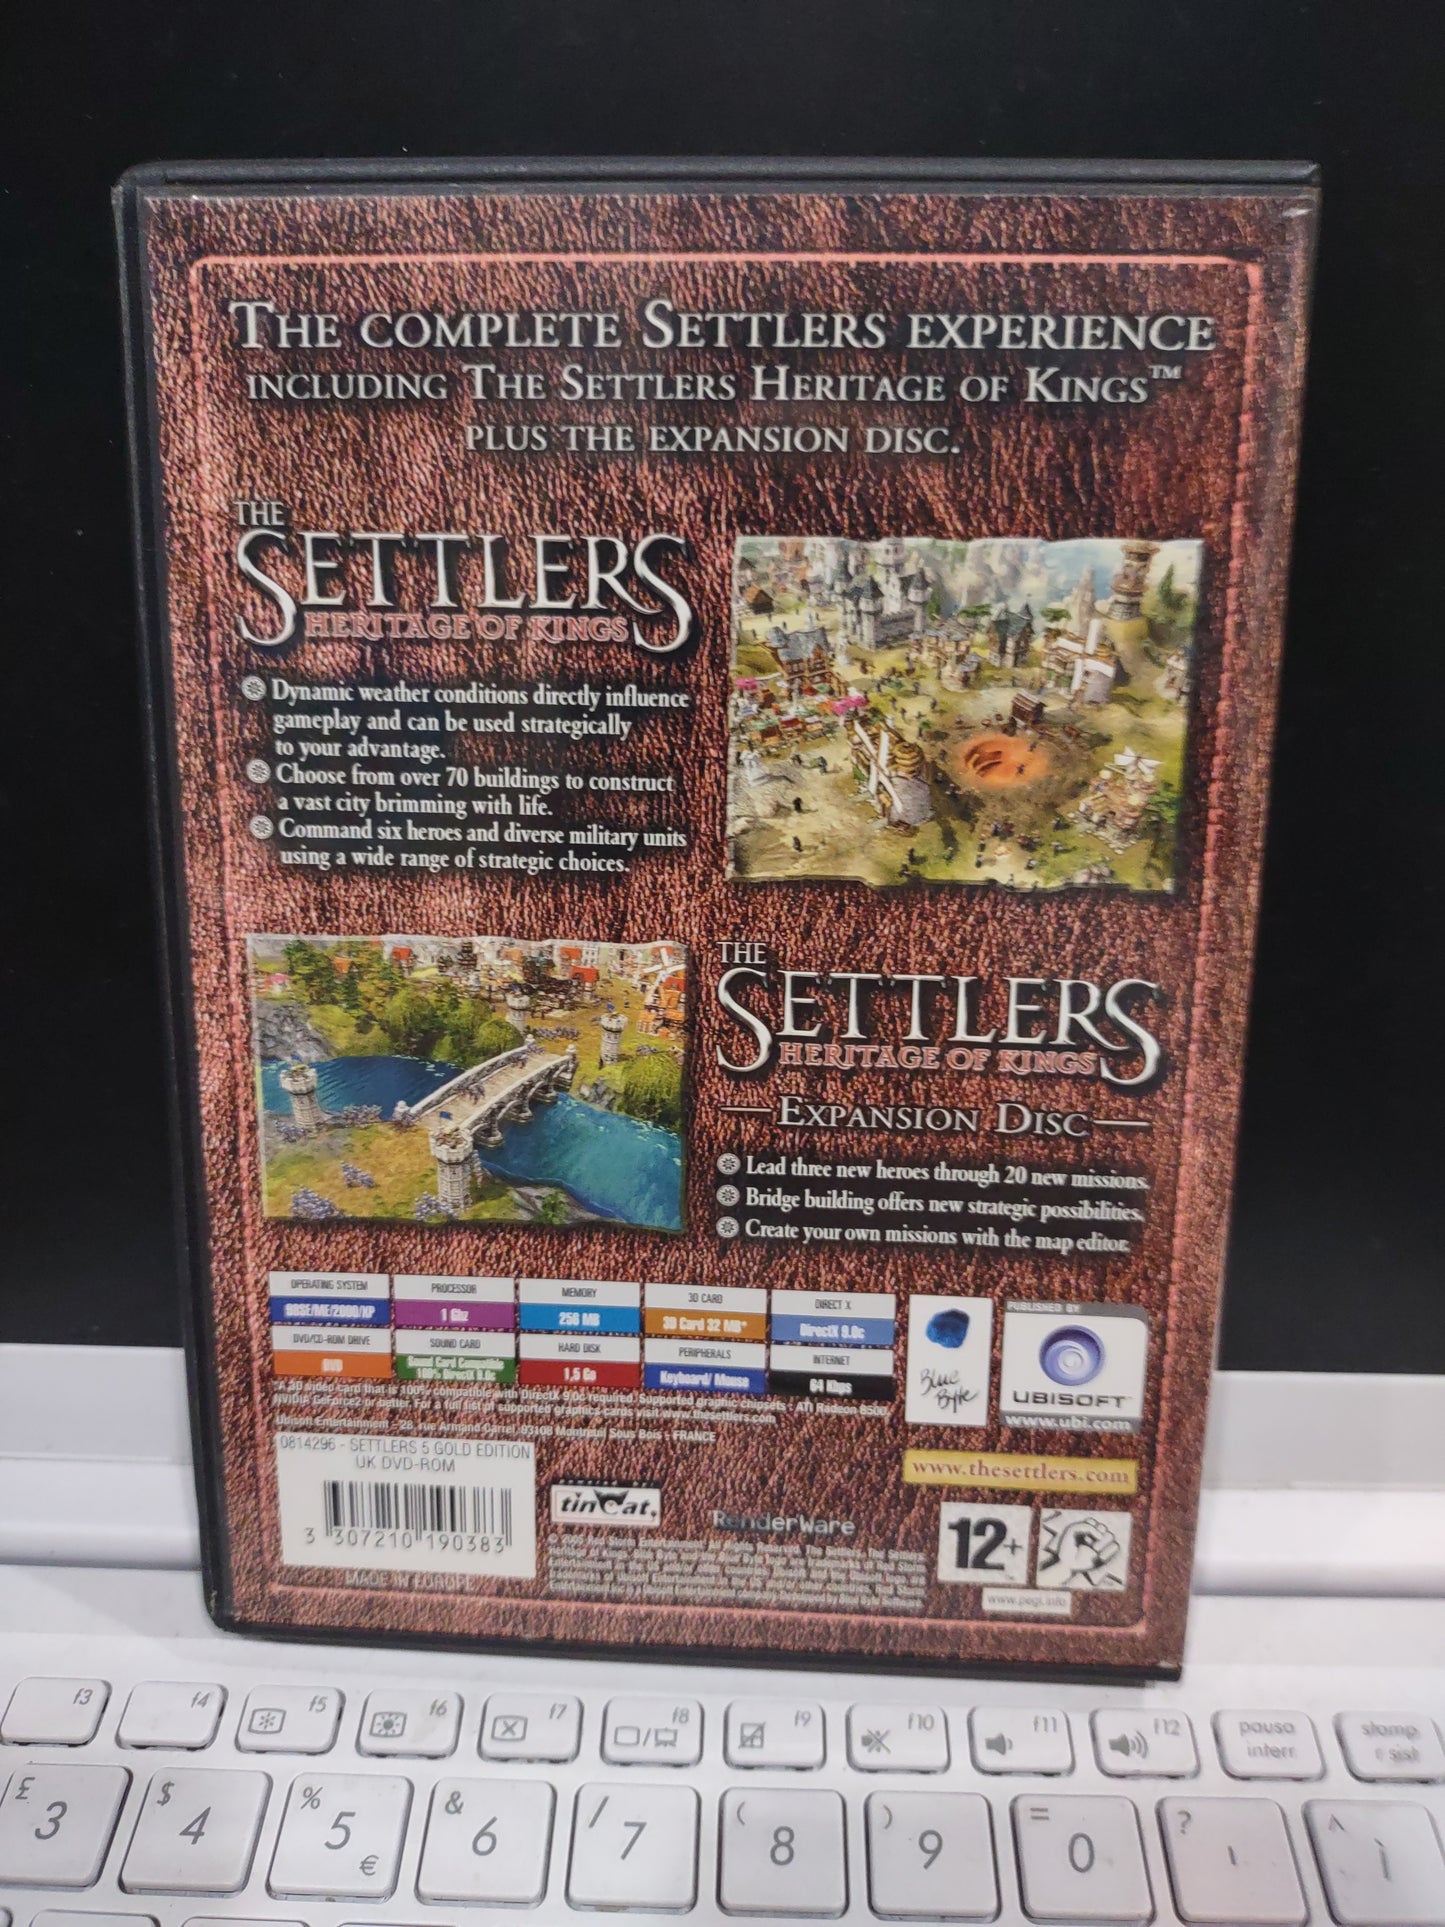 Gioco PC the settlers Gold edition